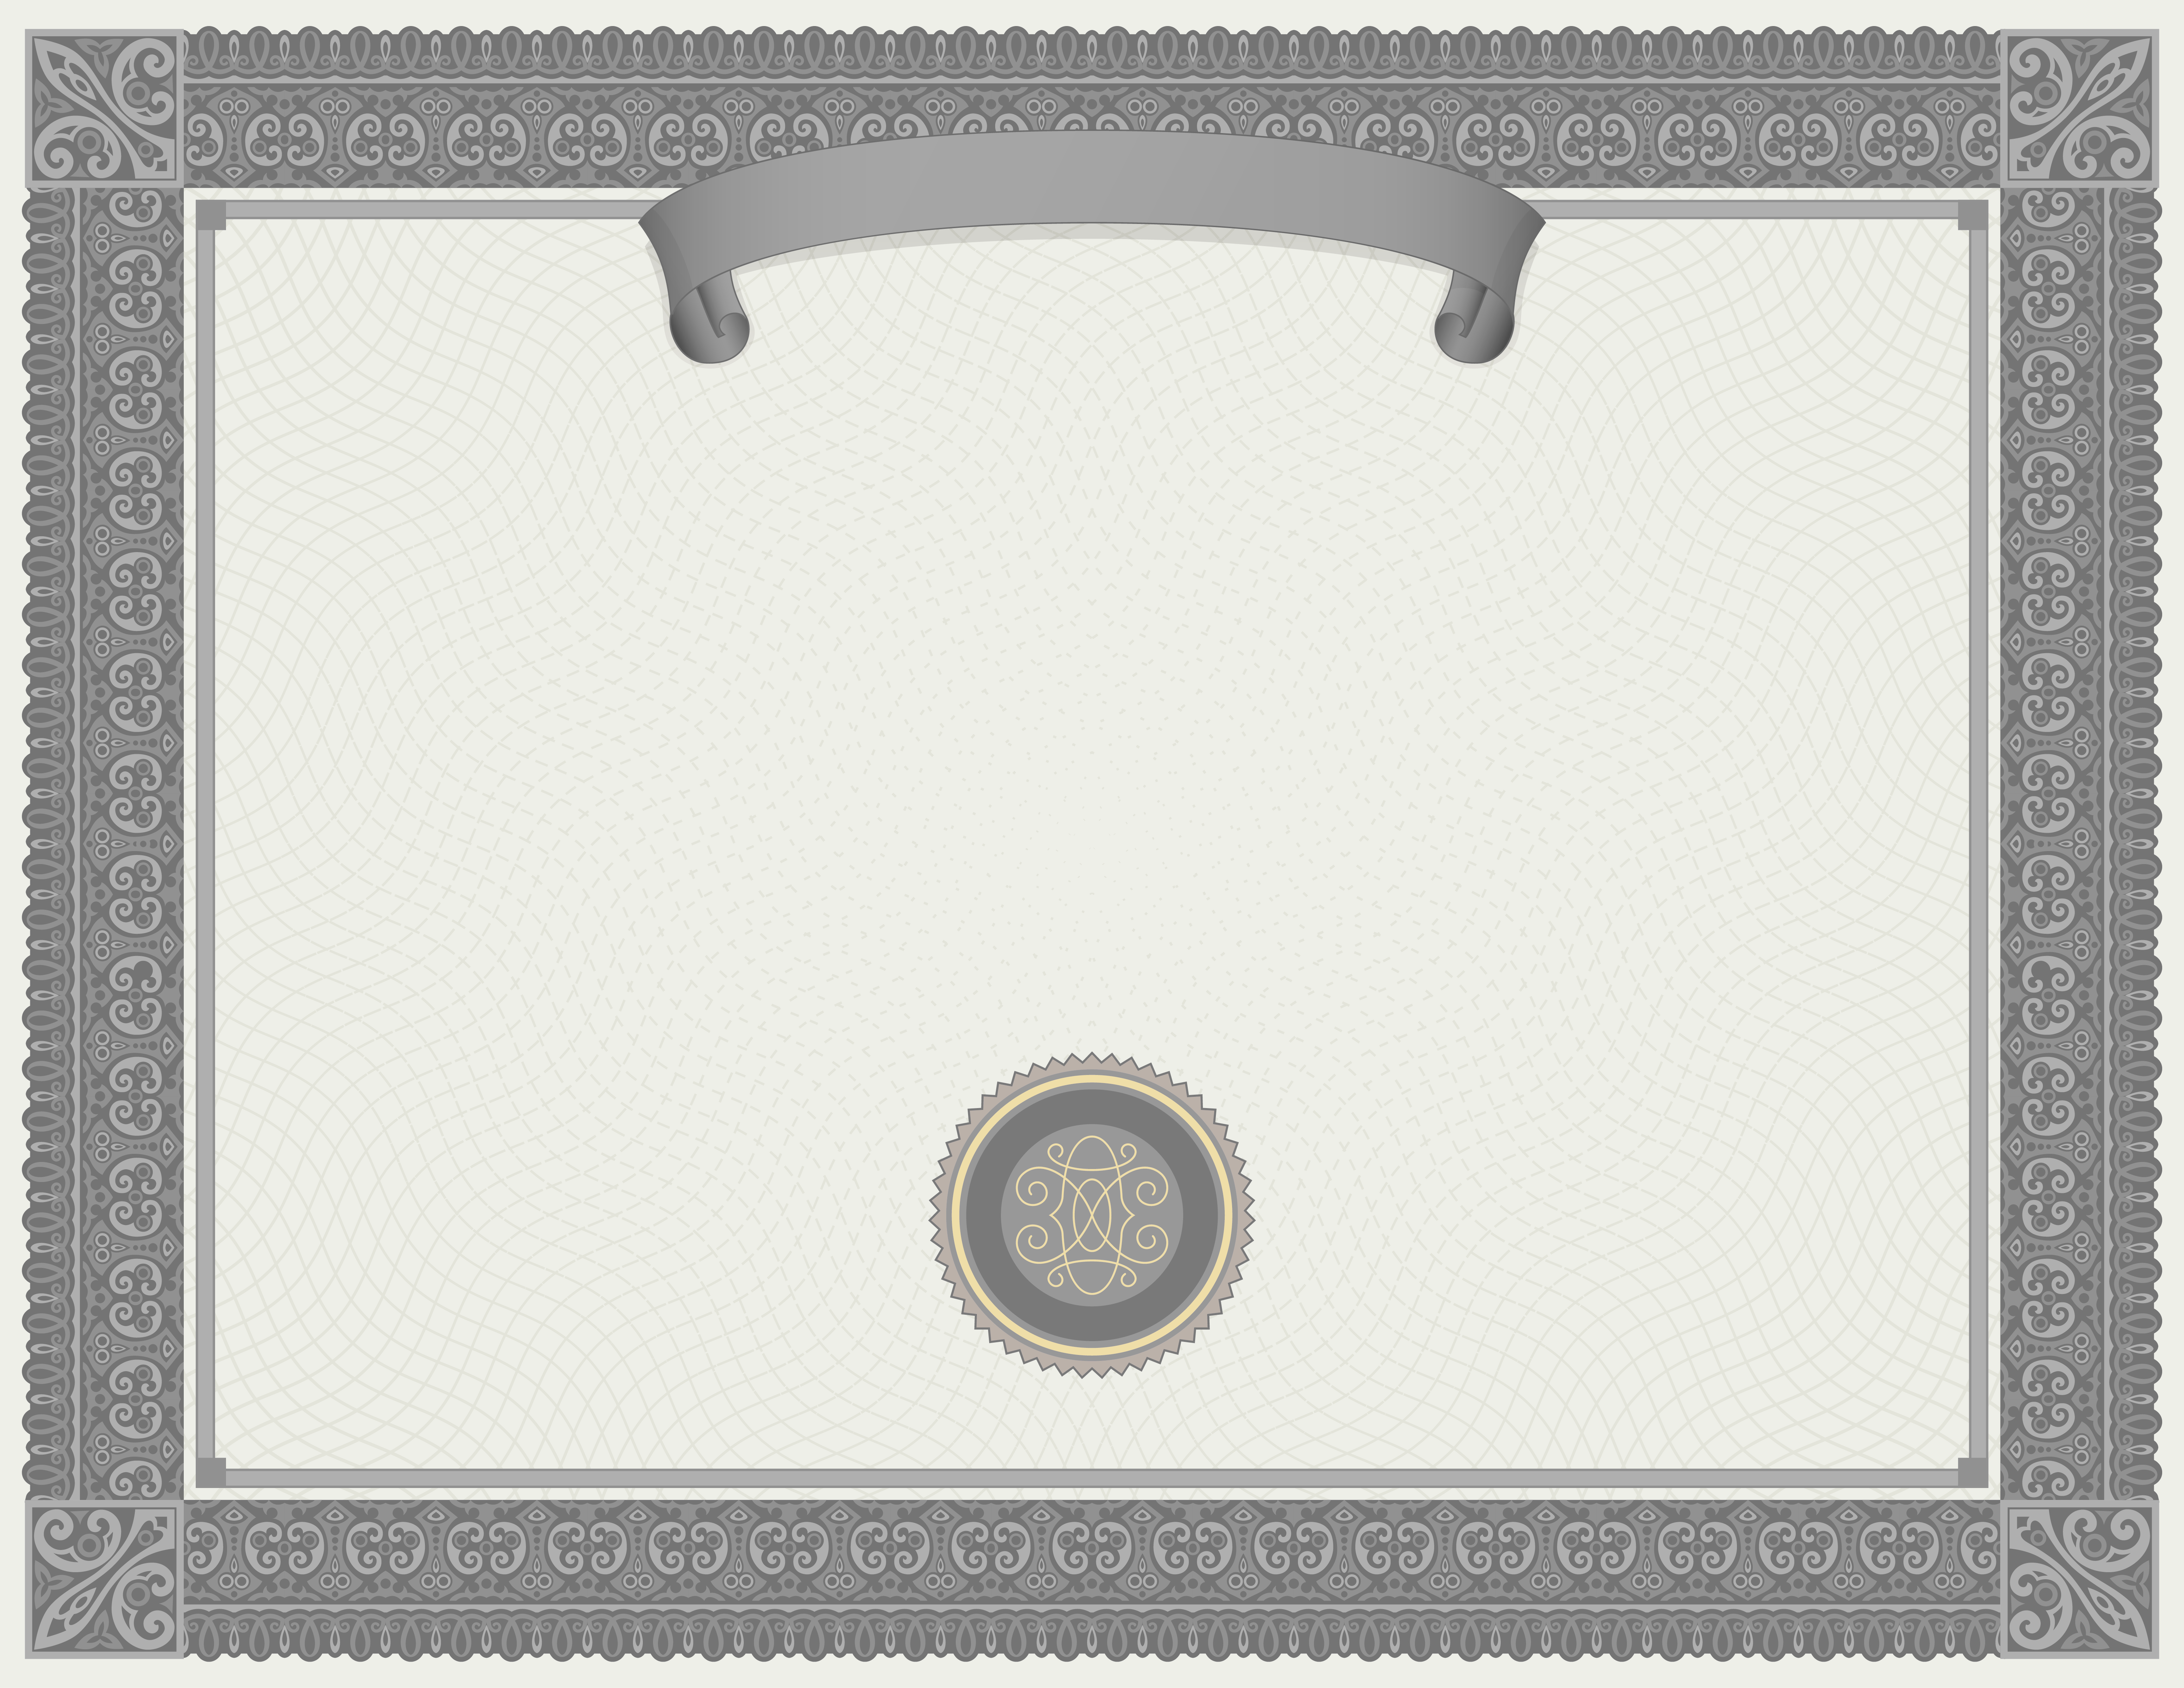 Grey Certificate PNG Image​-Quality Image and Transparent PNG Free Clipart